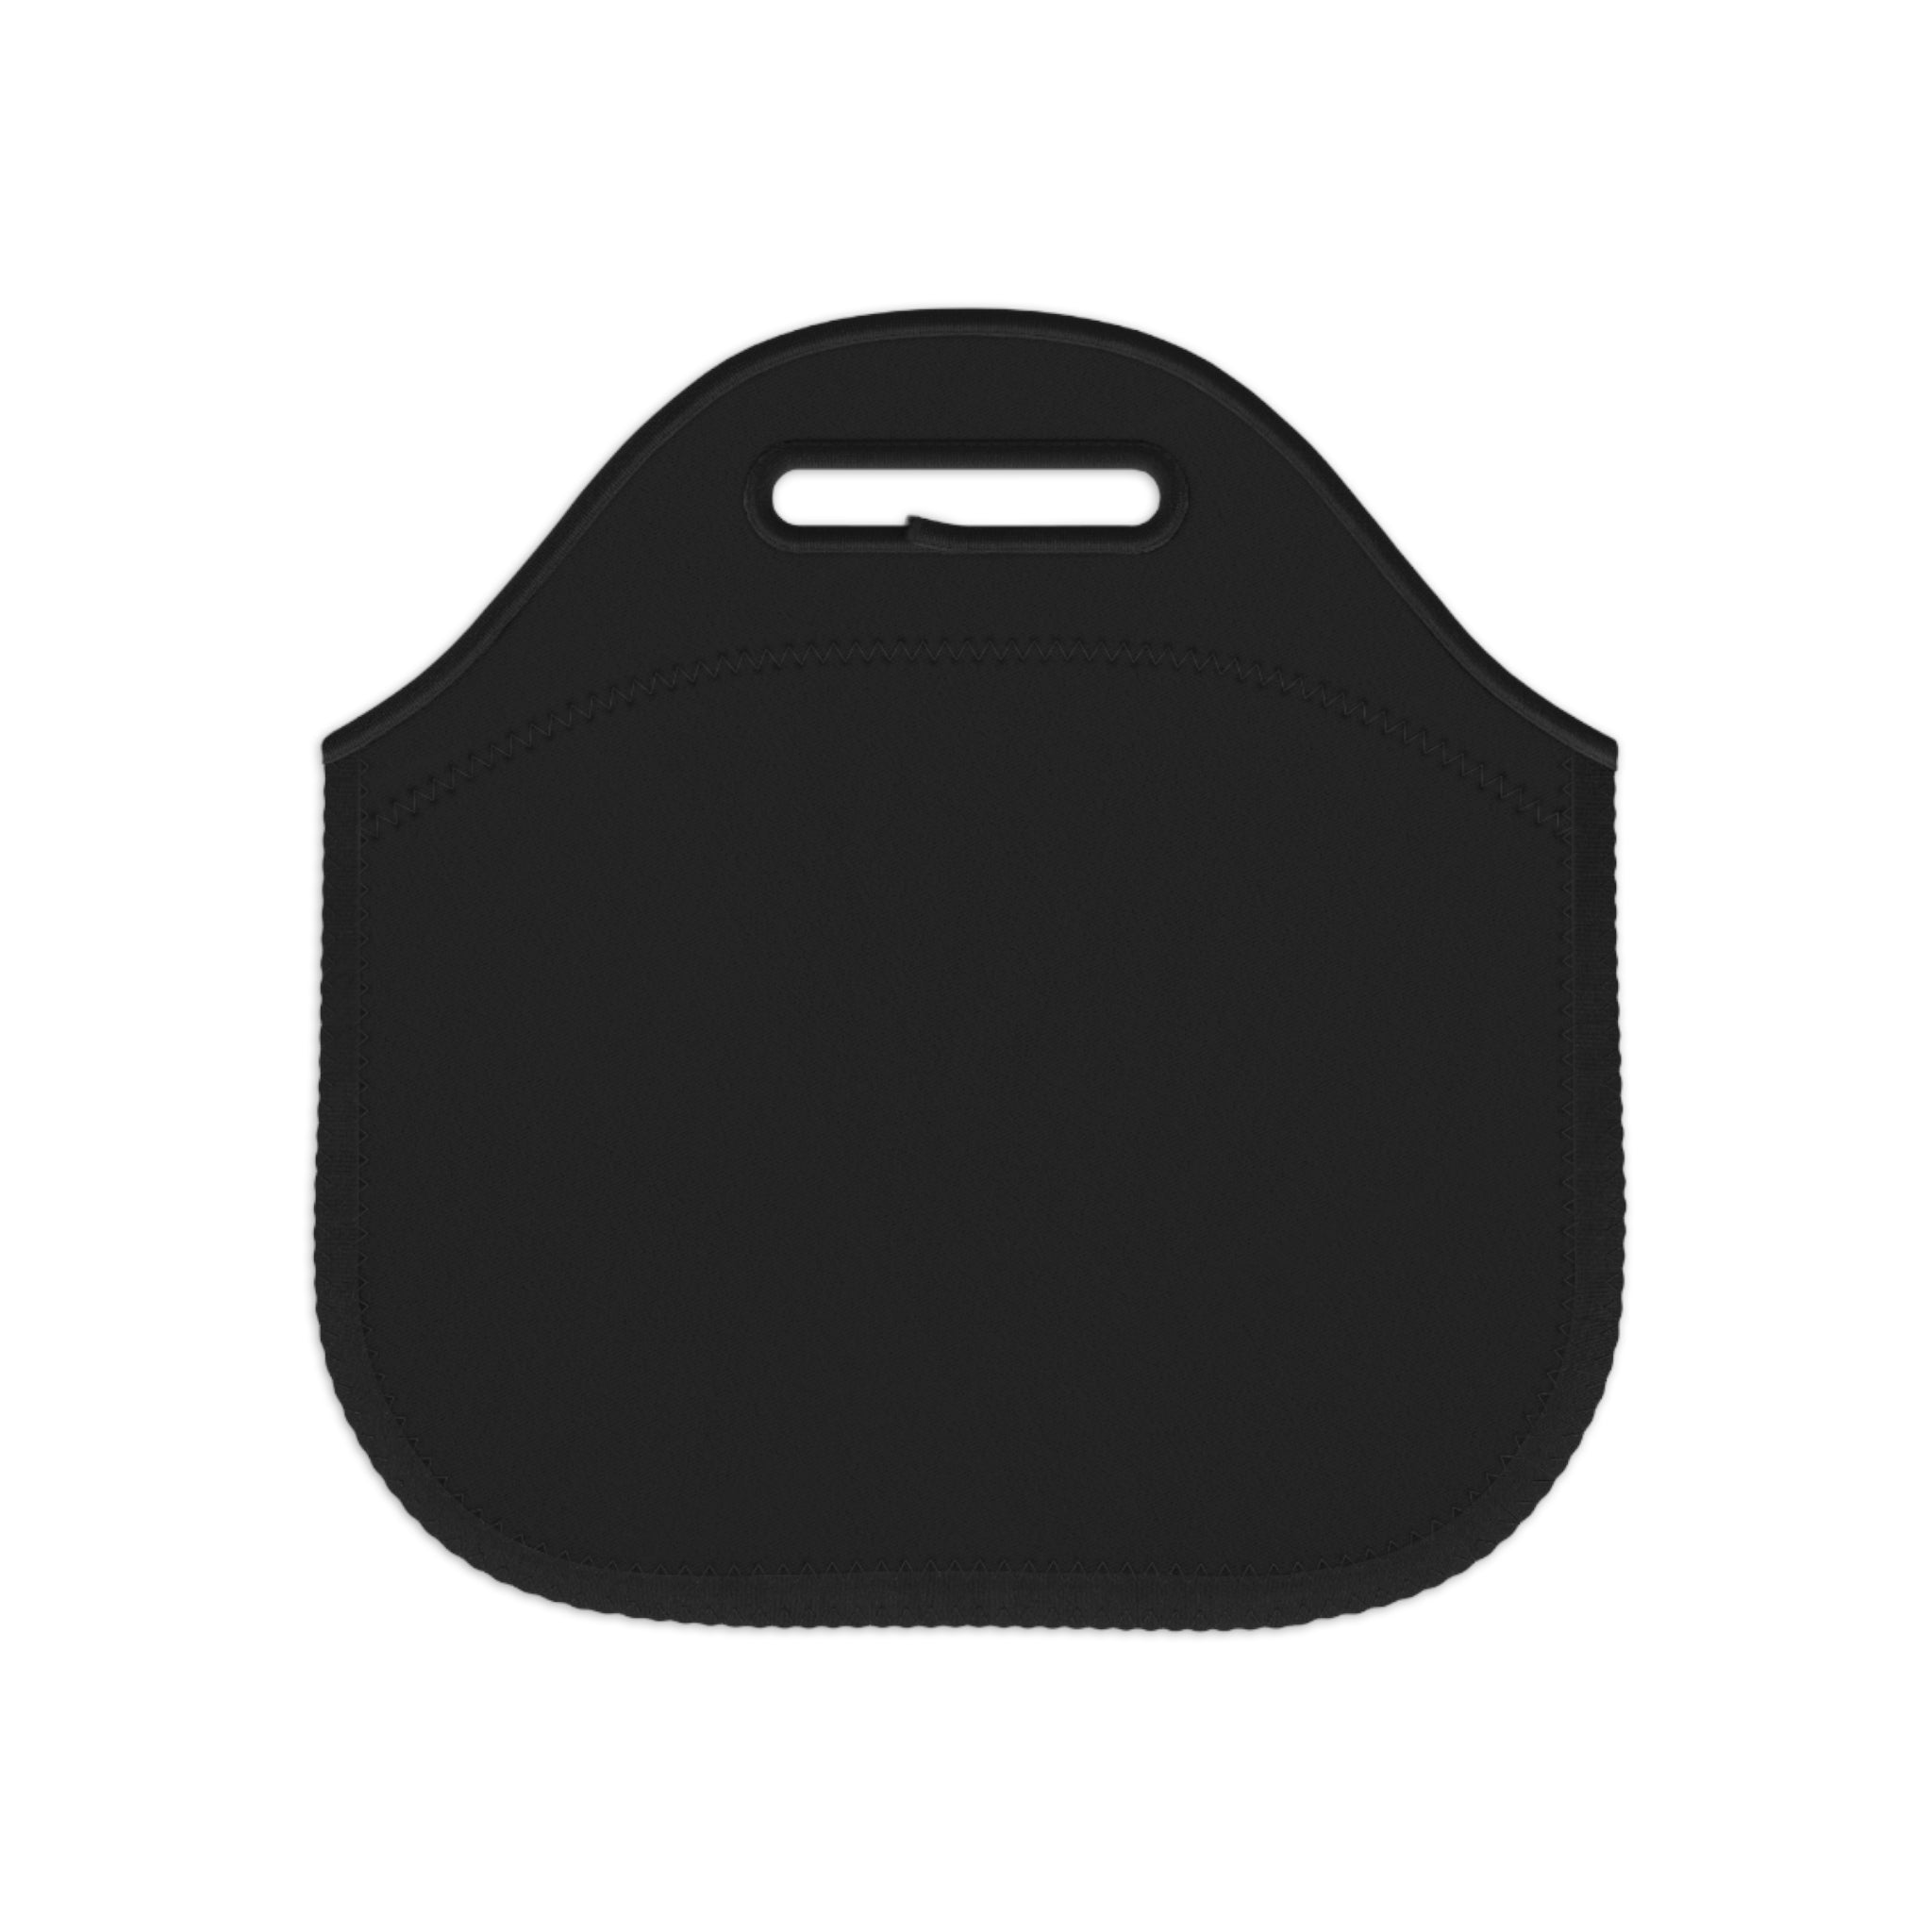 Printify Bags 12" × 12'' Hanging in There - Neoprene Black Lunch Bag